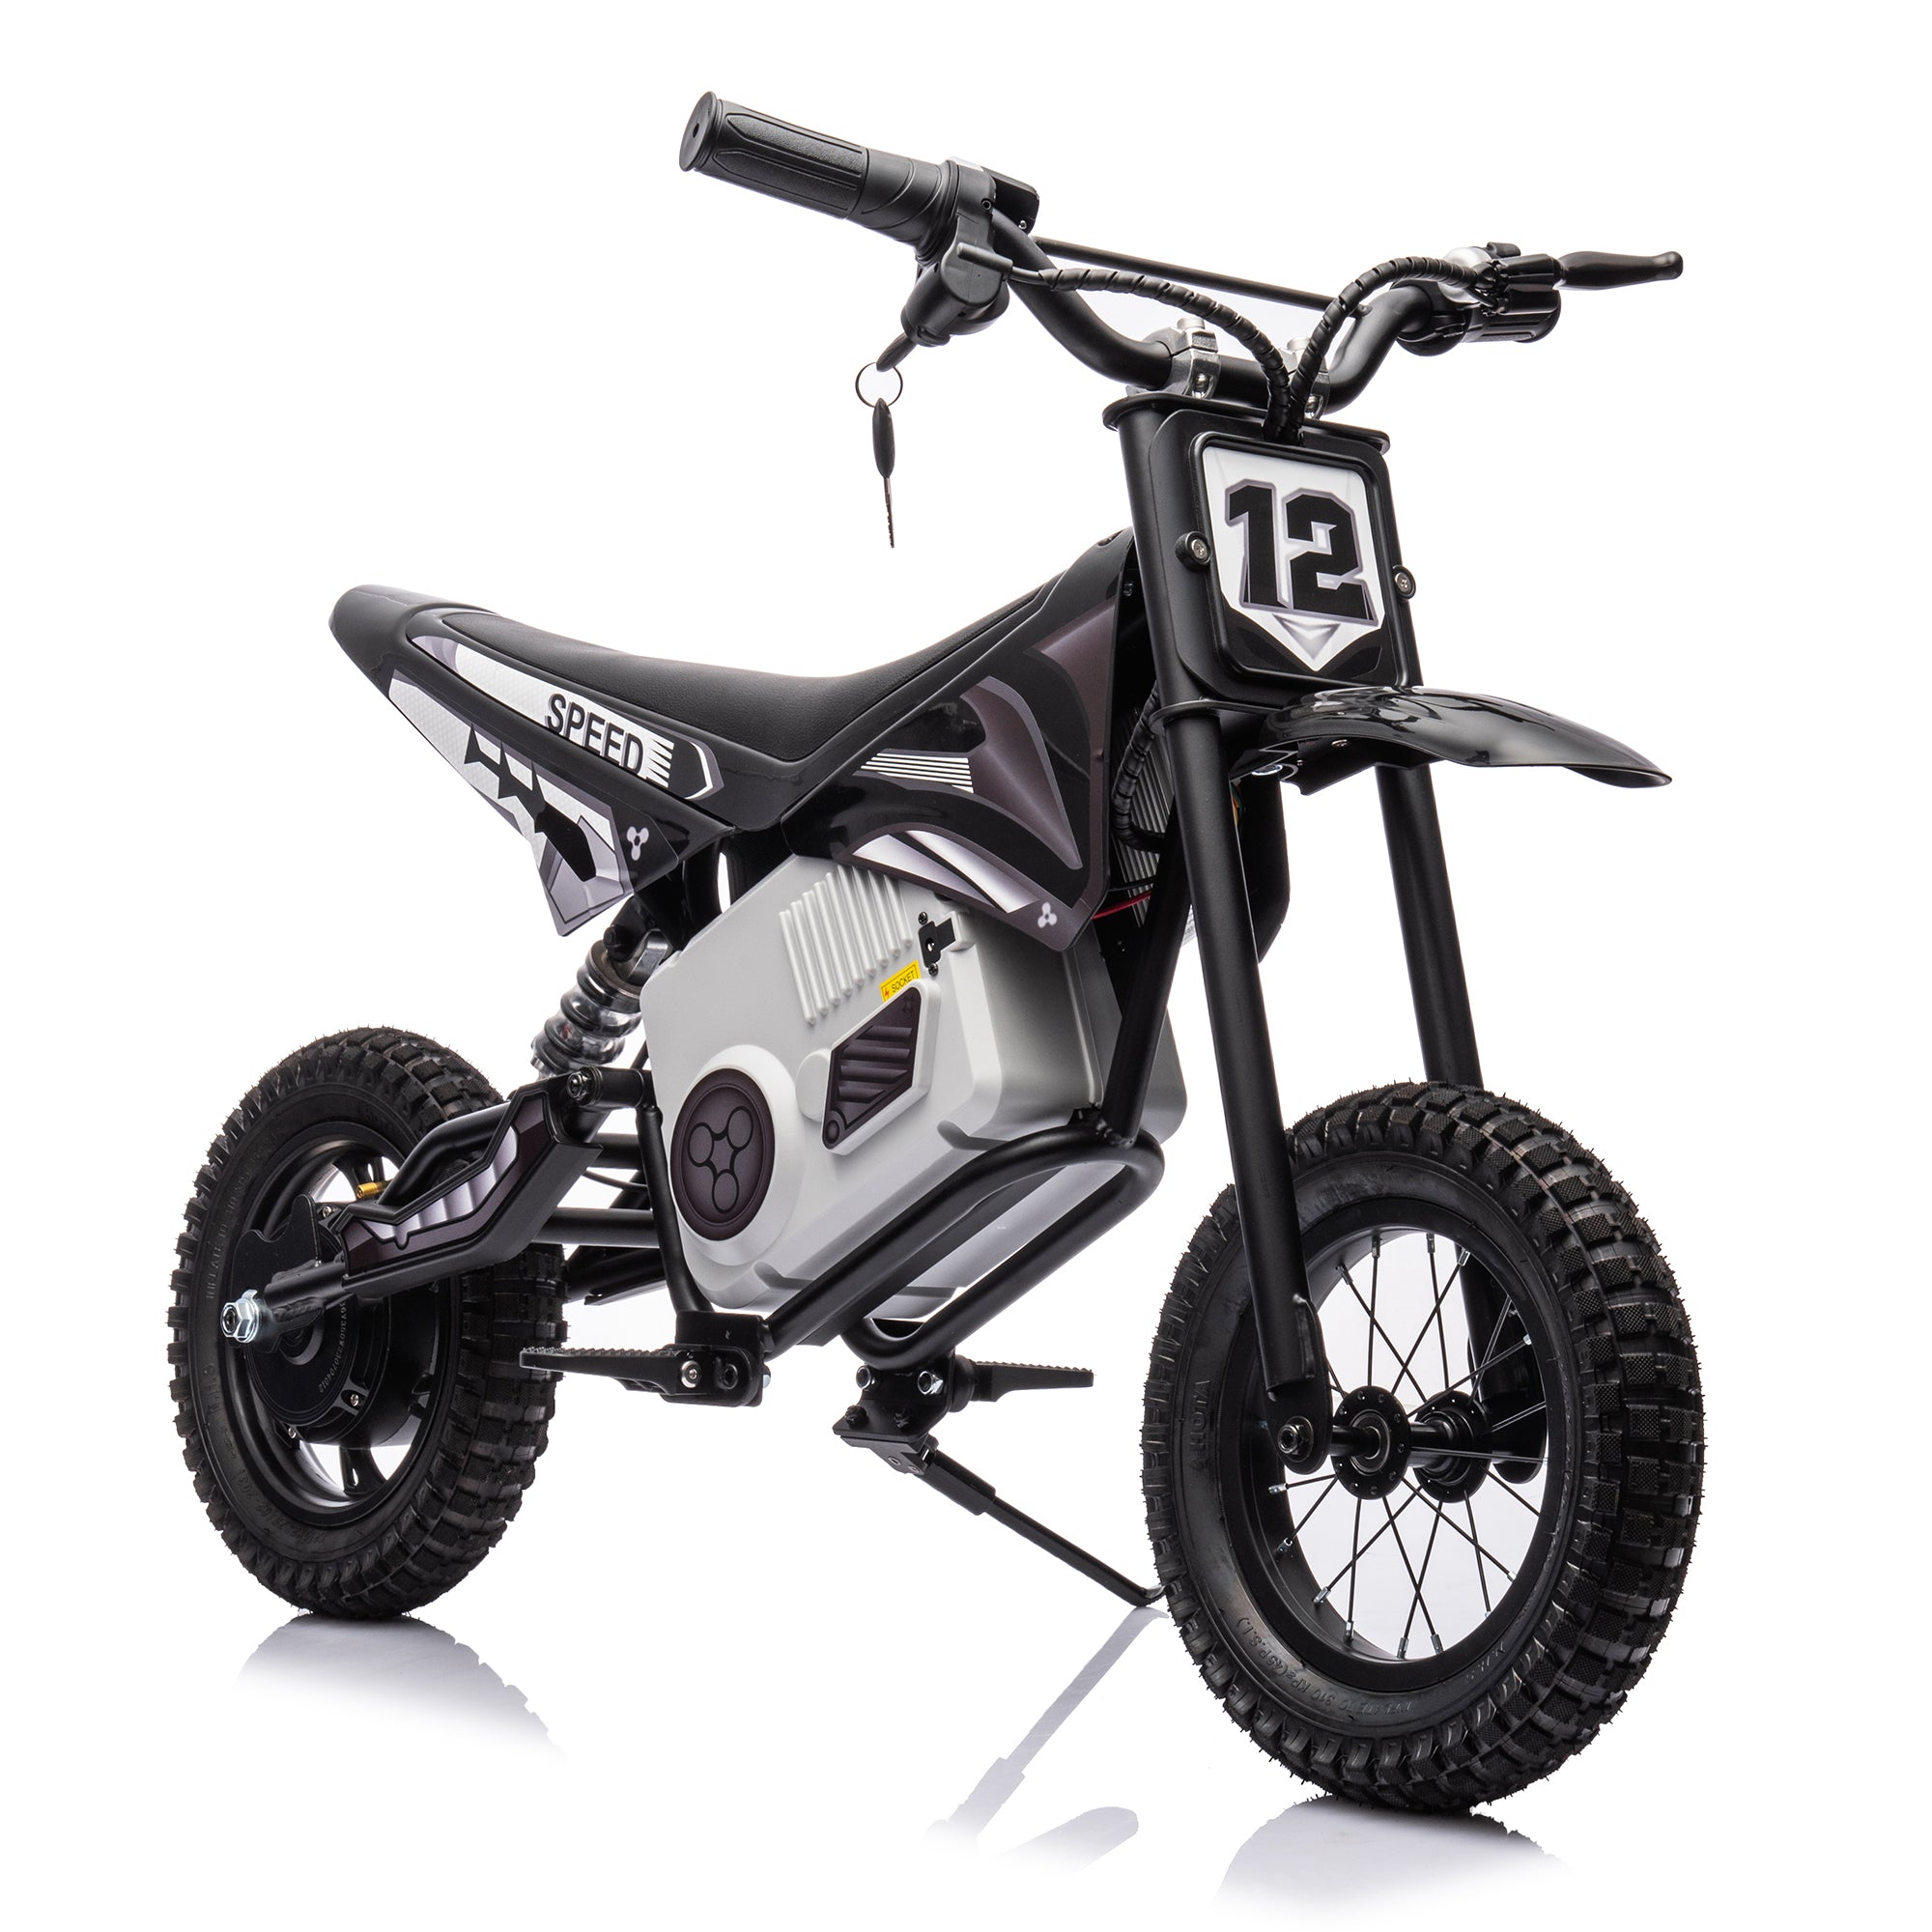 🆓🚛 36V Electric Mini Dirt Motorcycle for Kids, 350W Xxxl Motorcycle, Stepless Variable Speed Drive, Disc Brake, No Chain, Steady Acceleration, Horn, Power Display, Rate Display, 176 Pounds for 50M Or More, Age 14+, Black